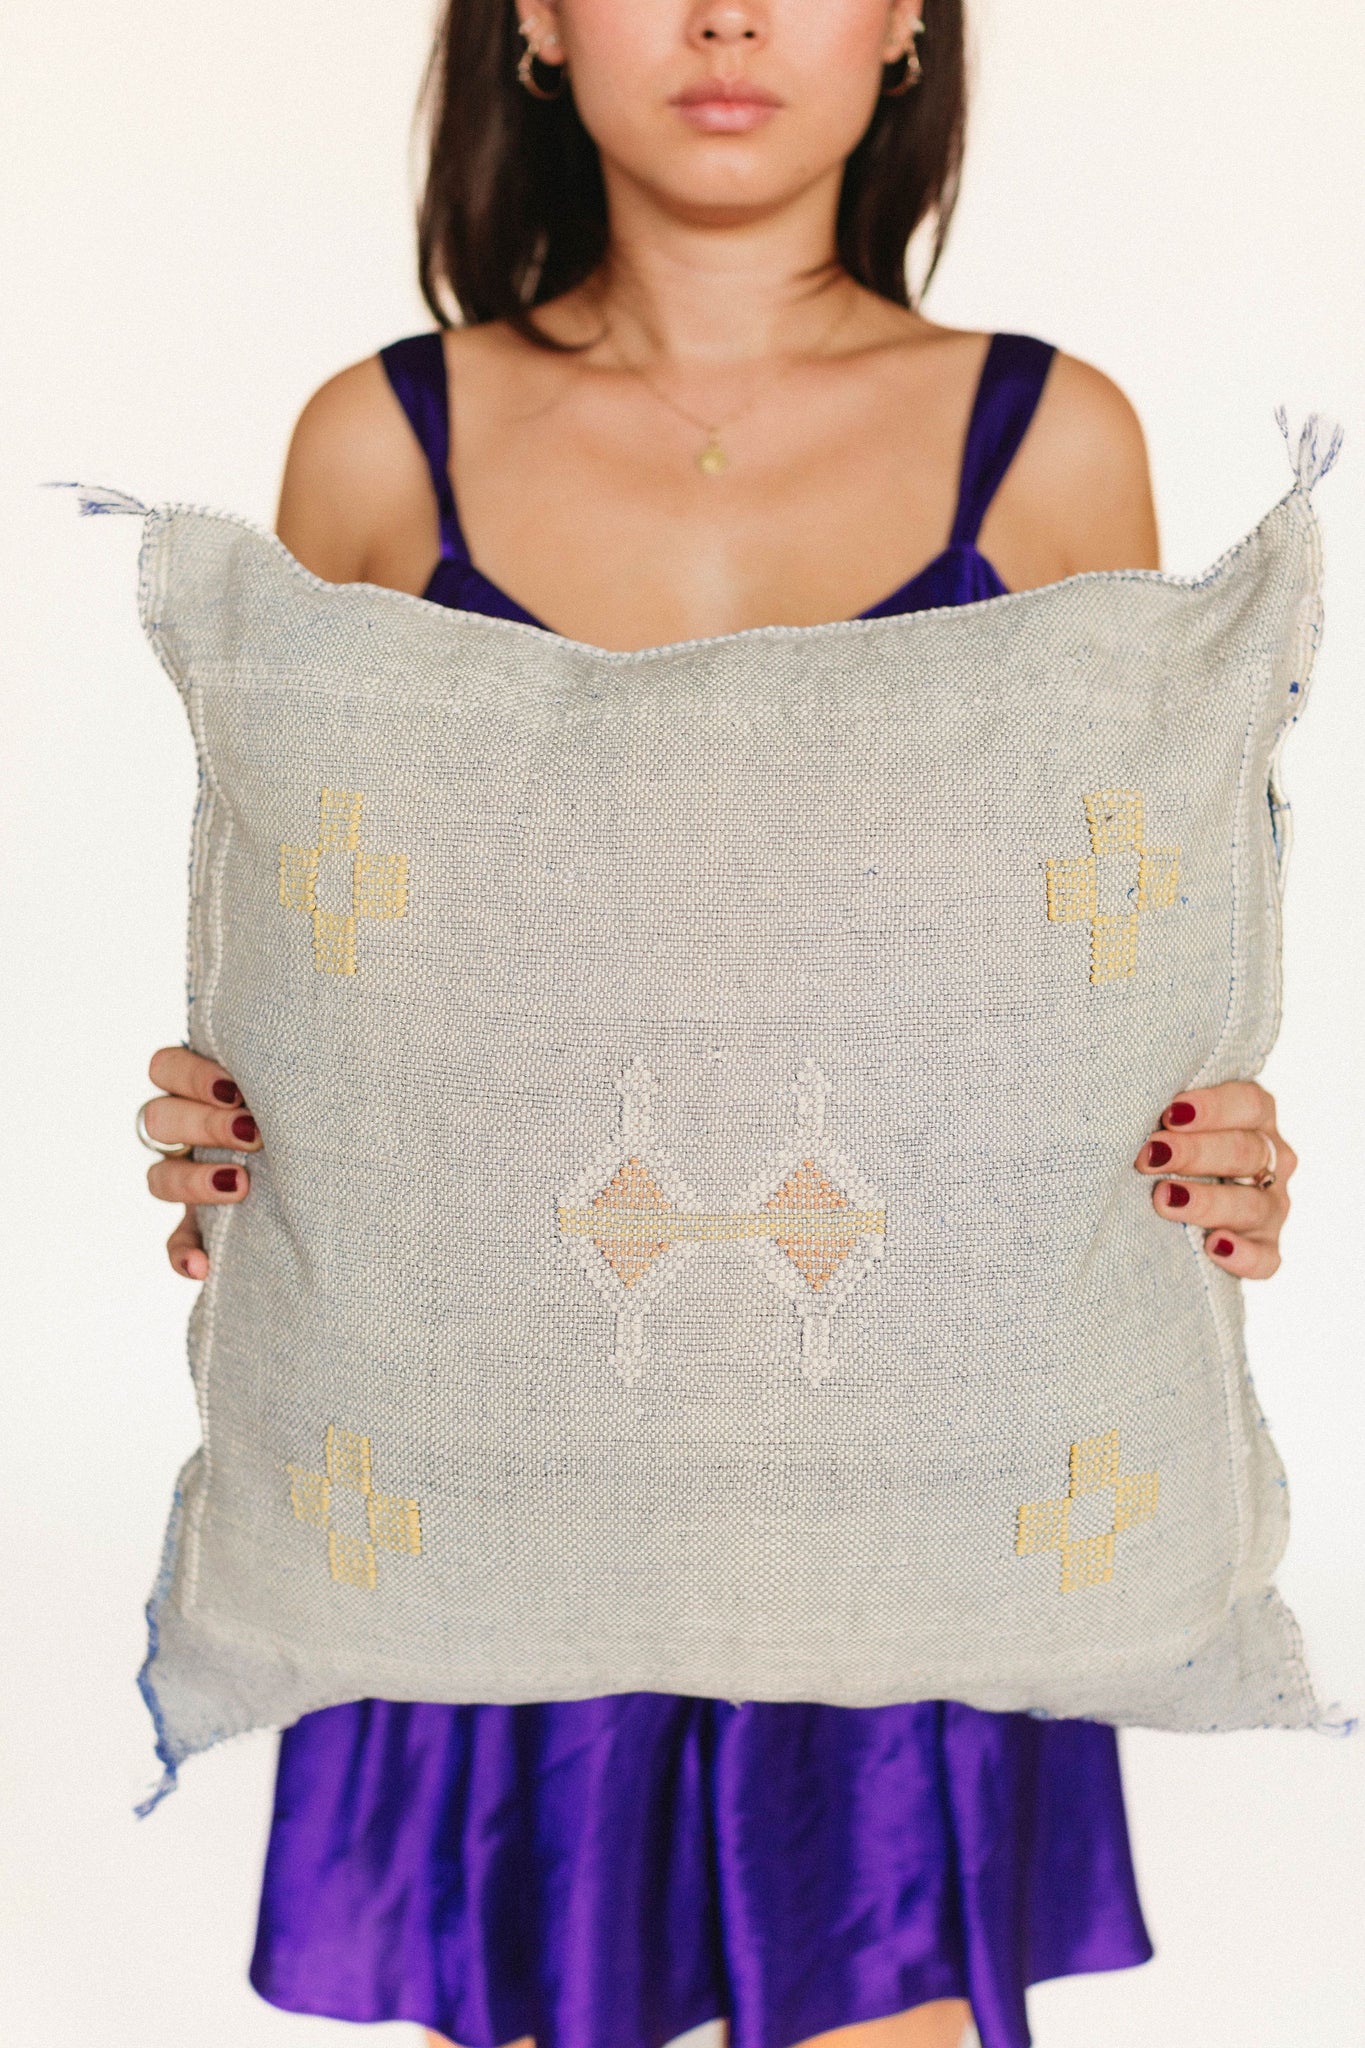 Pillow cover made out of Moroccan cactus silk and comes in many colors